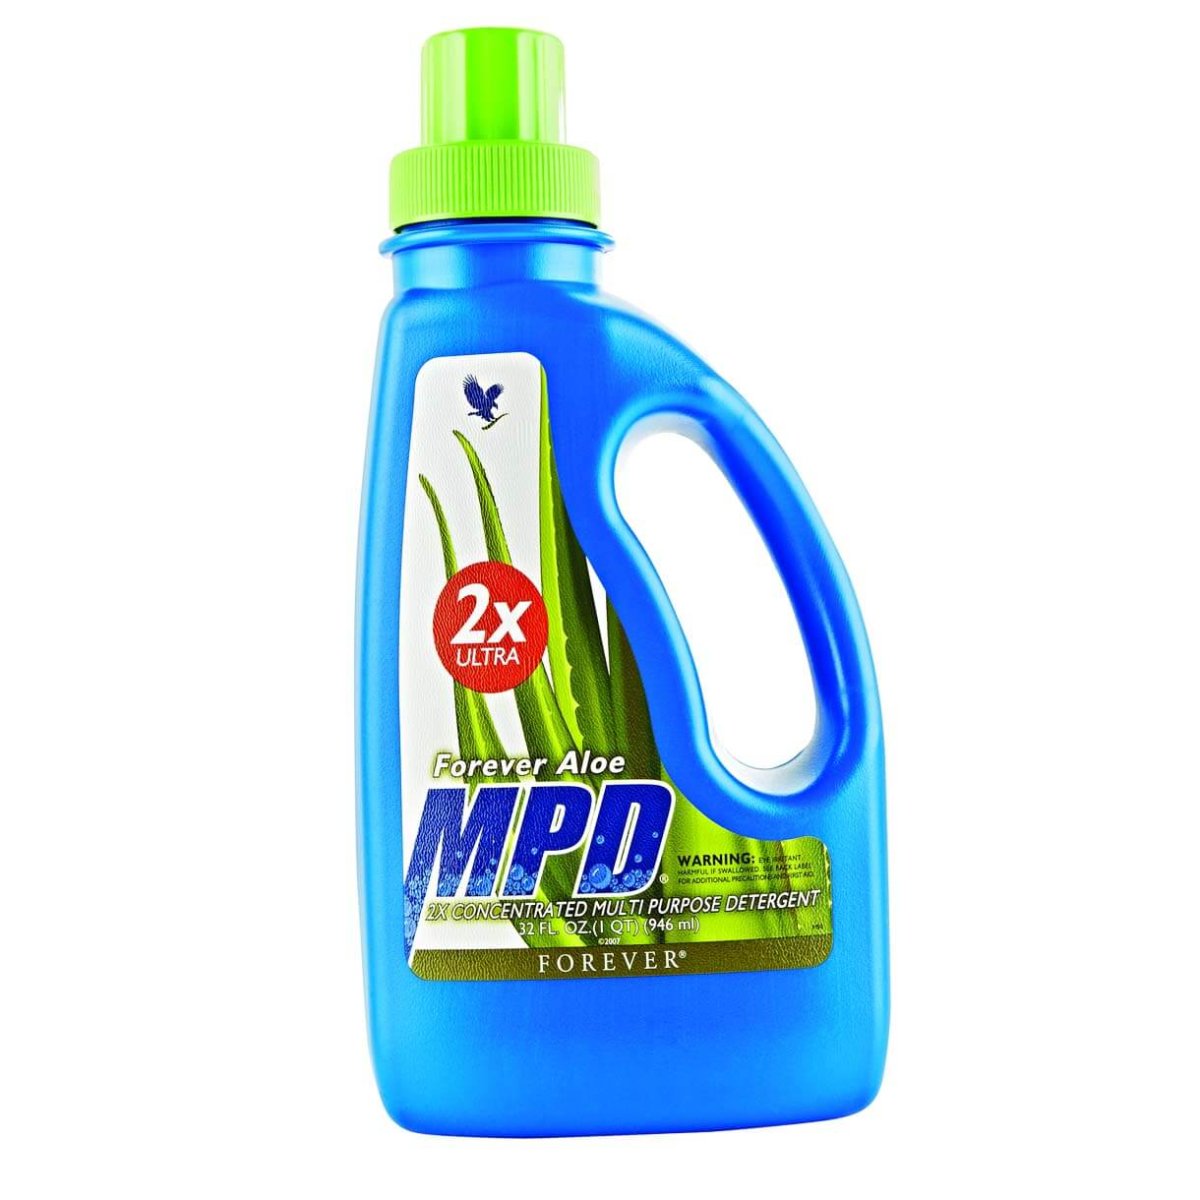 Forever Aloe MPD 2x Ultra - Rengøring -